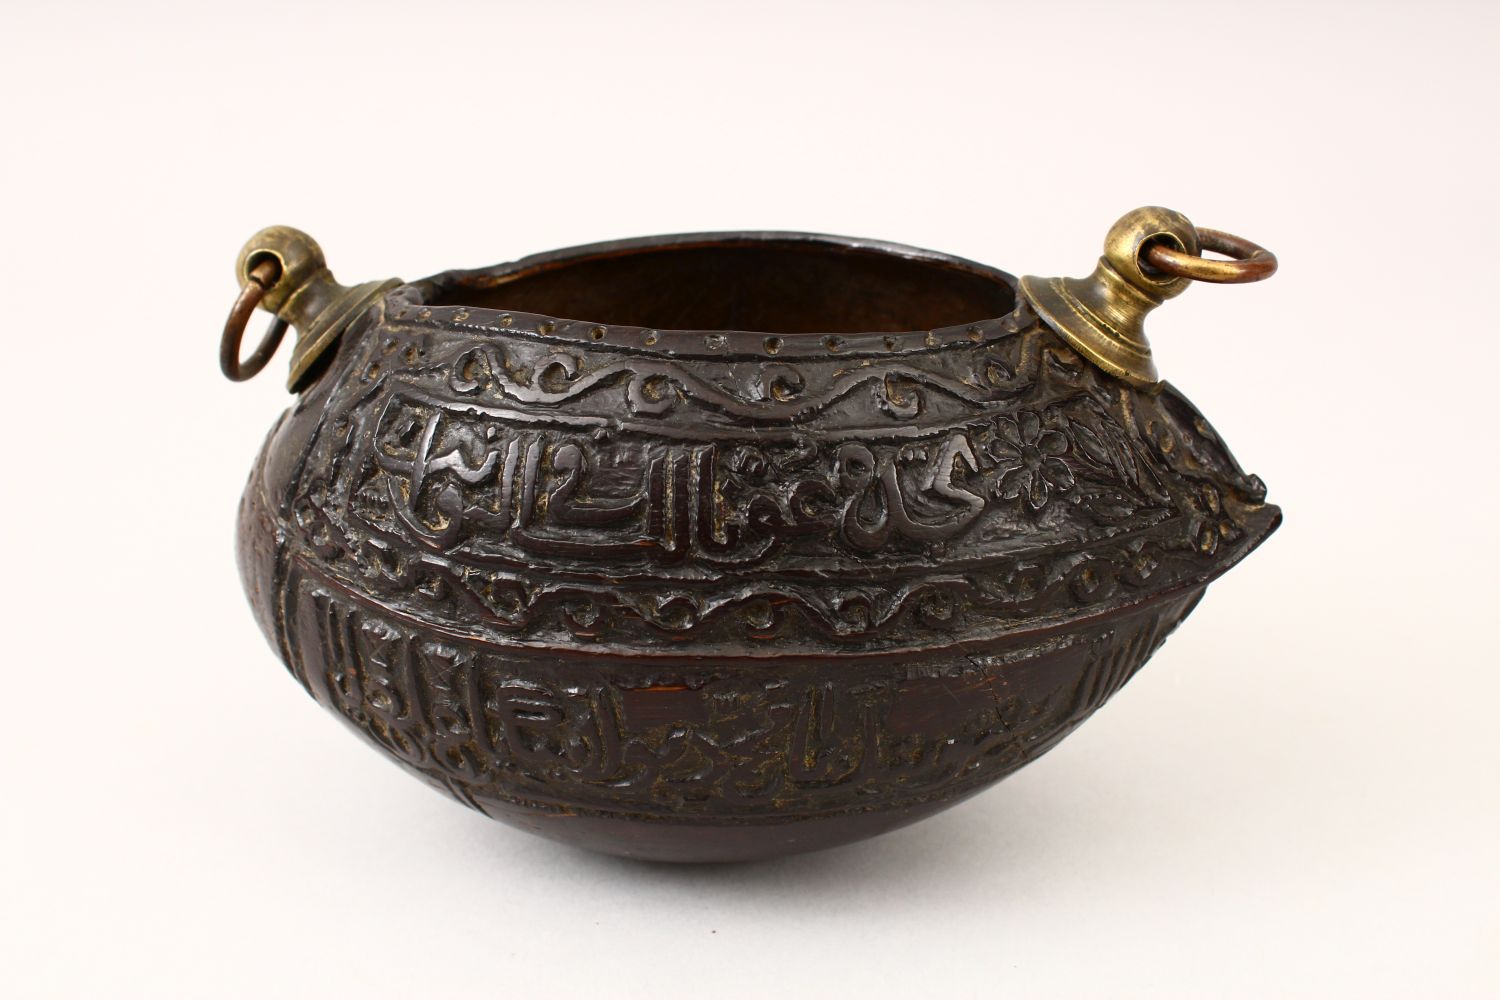 A GOOD 19TH CENTURY ISLAMIC COCO KASHKOOL, carved with Islamic calligraphy and scroll decoration - Image 5 of 14